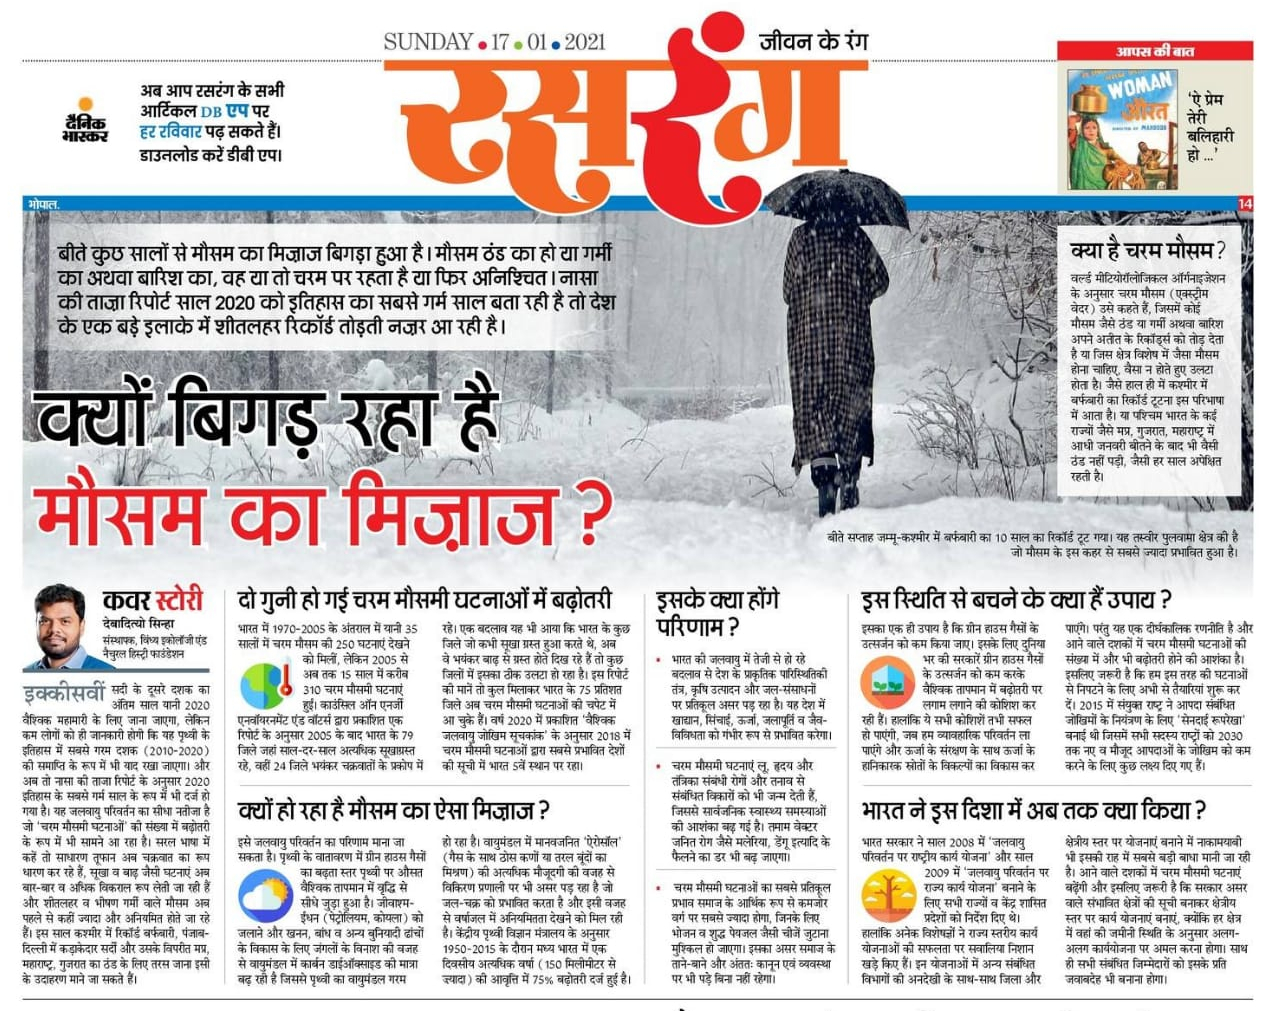 Scanned Article on Extreme Weather Events India in Dainik Bhaskar 17 January 2021